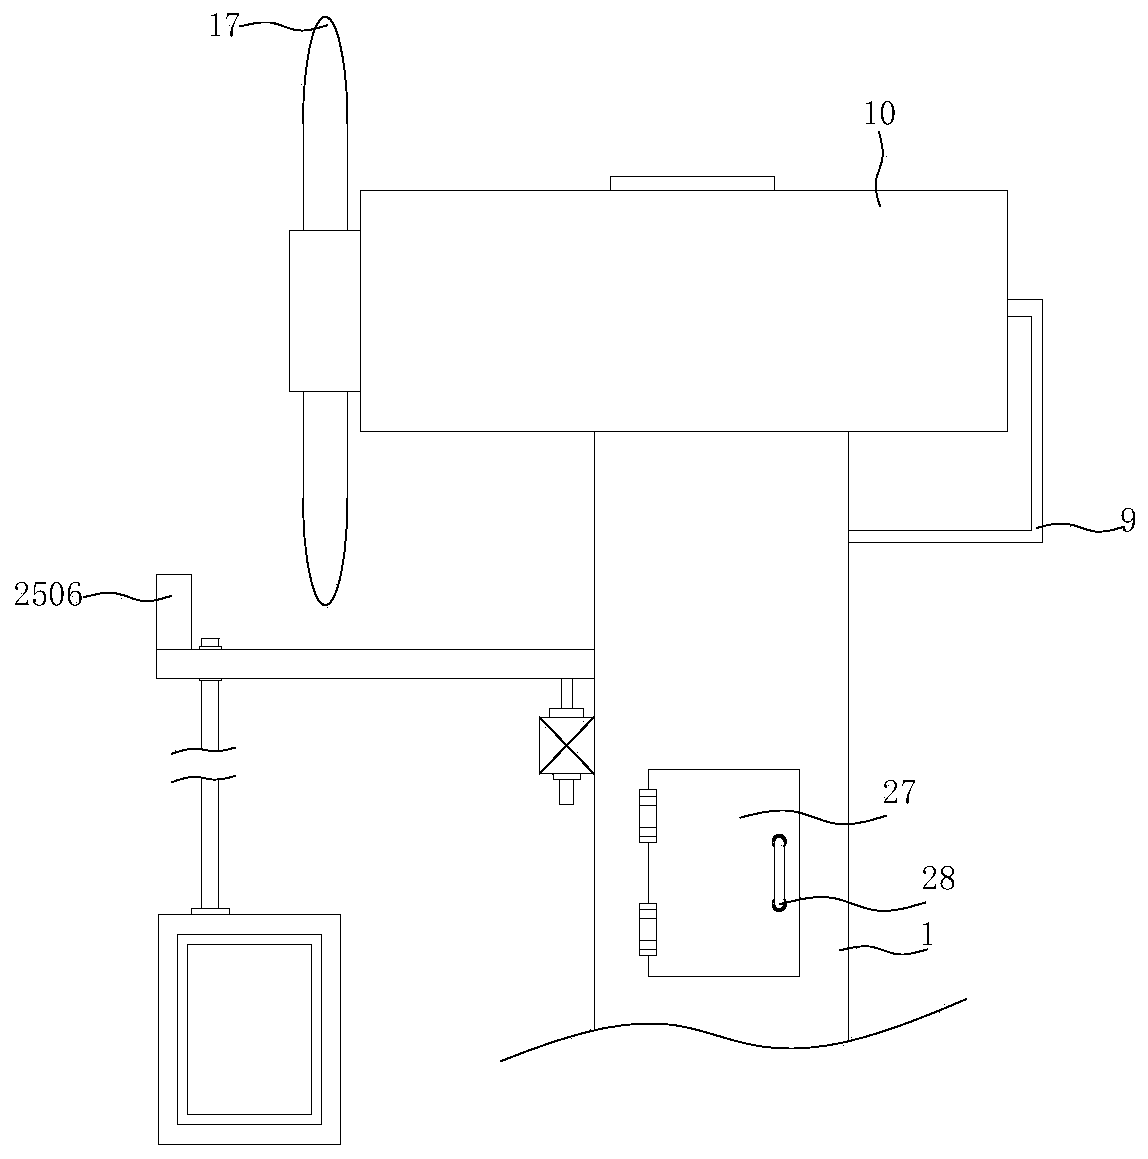 Built-in wind driven generator blade heating device